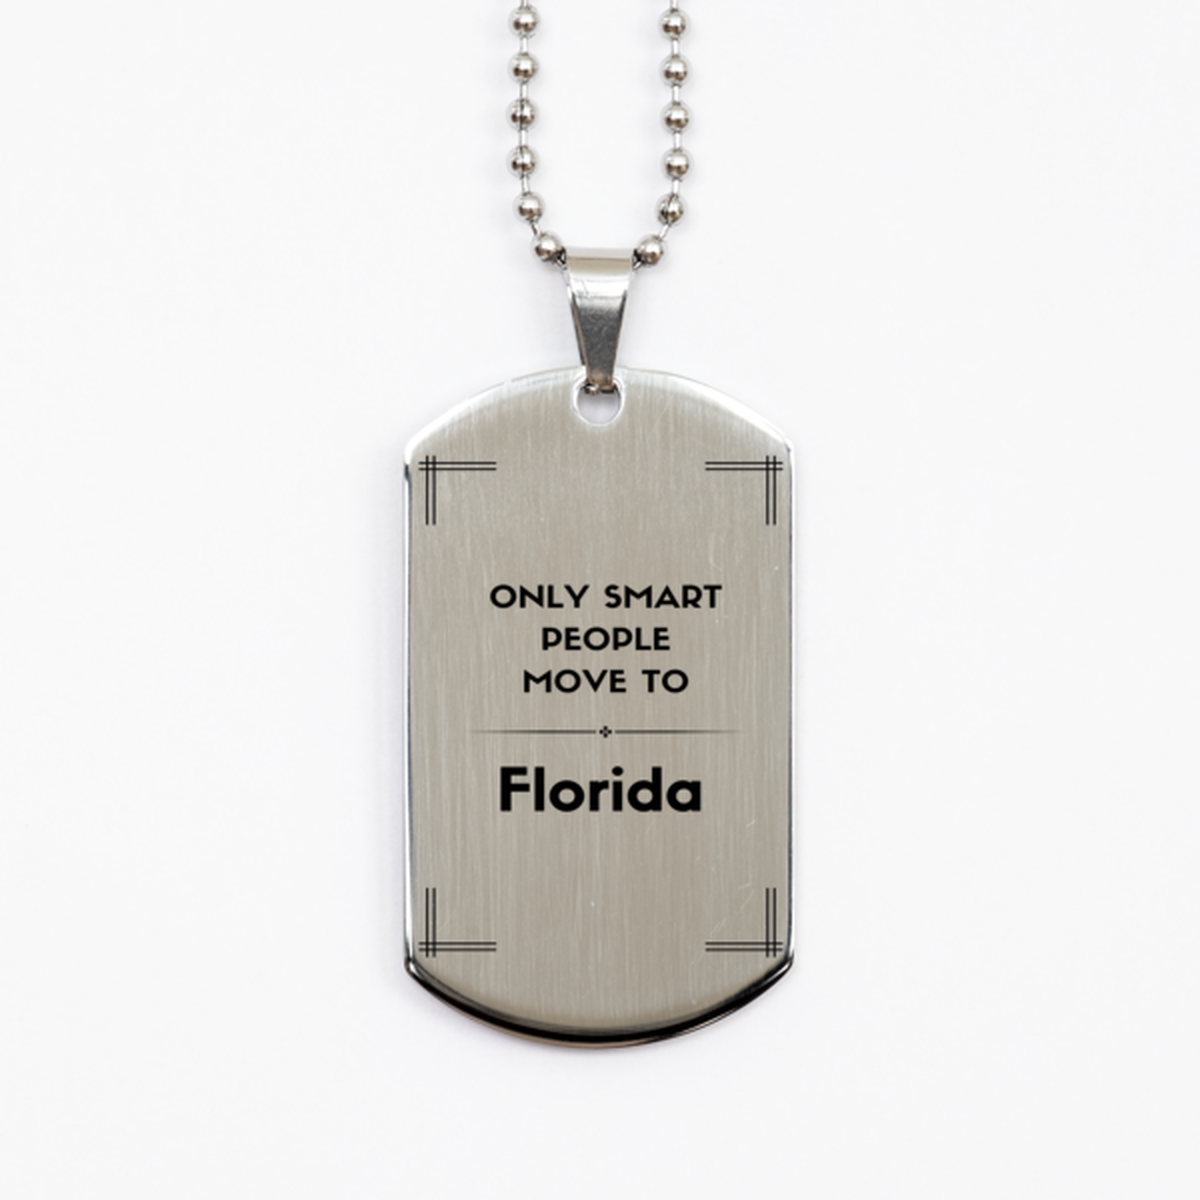 Only smart people move to Florida Silver Dog Tag, Gag Gifts For Florida, Move to Florida Gifts for Friends Coworker Funny Saying Quote